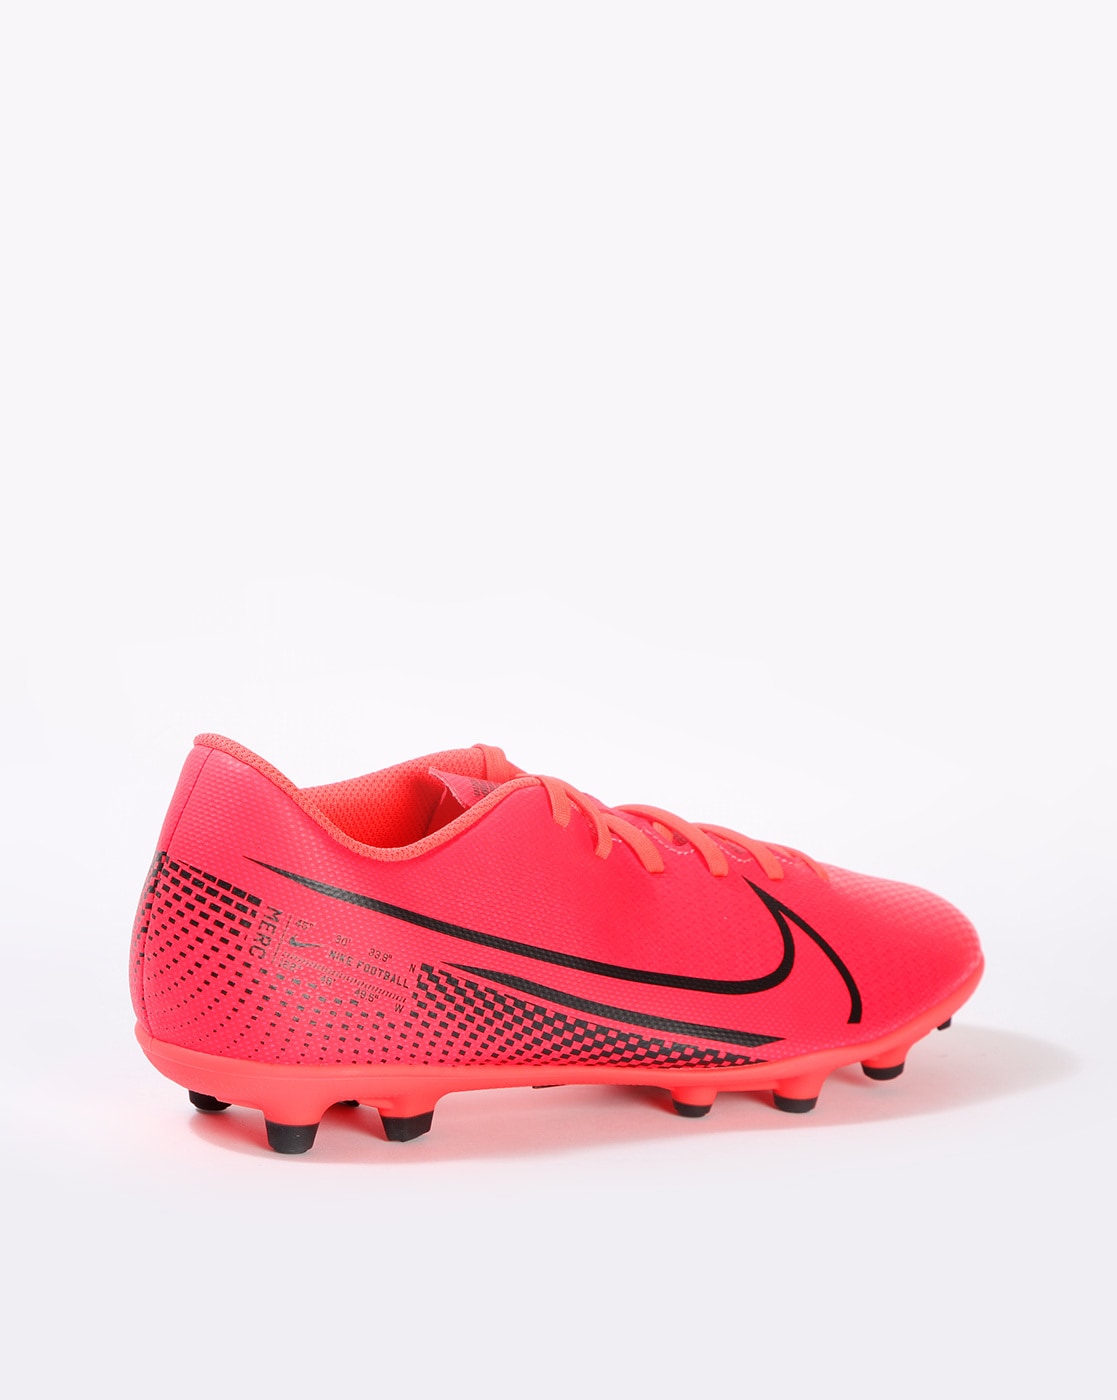 Football Shoes for Men: Top 6 Football Shoes for Men in India for Unmatched  Performance - The Economic Times